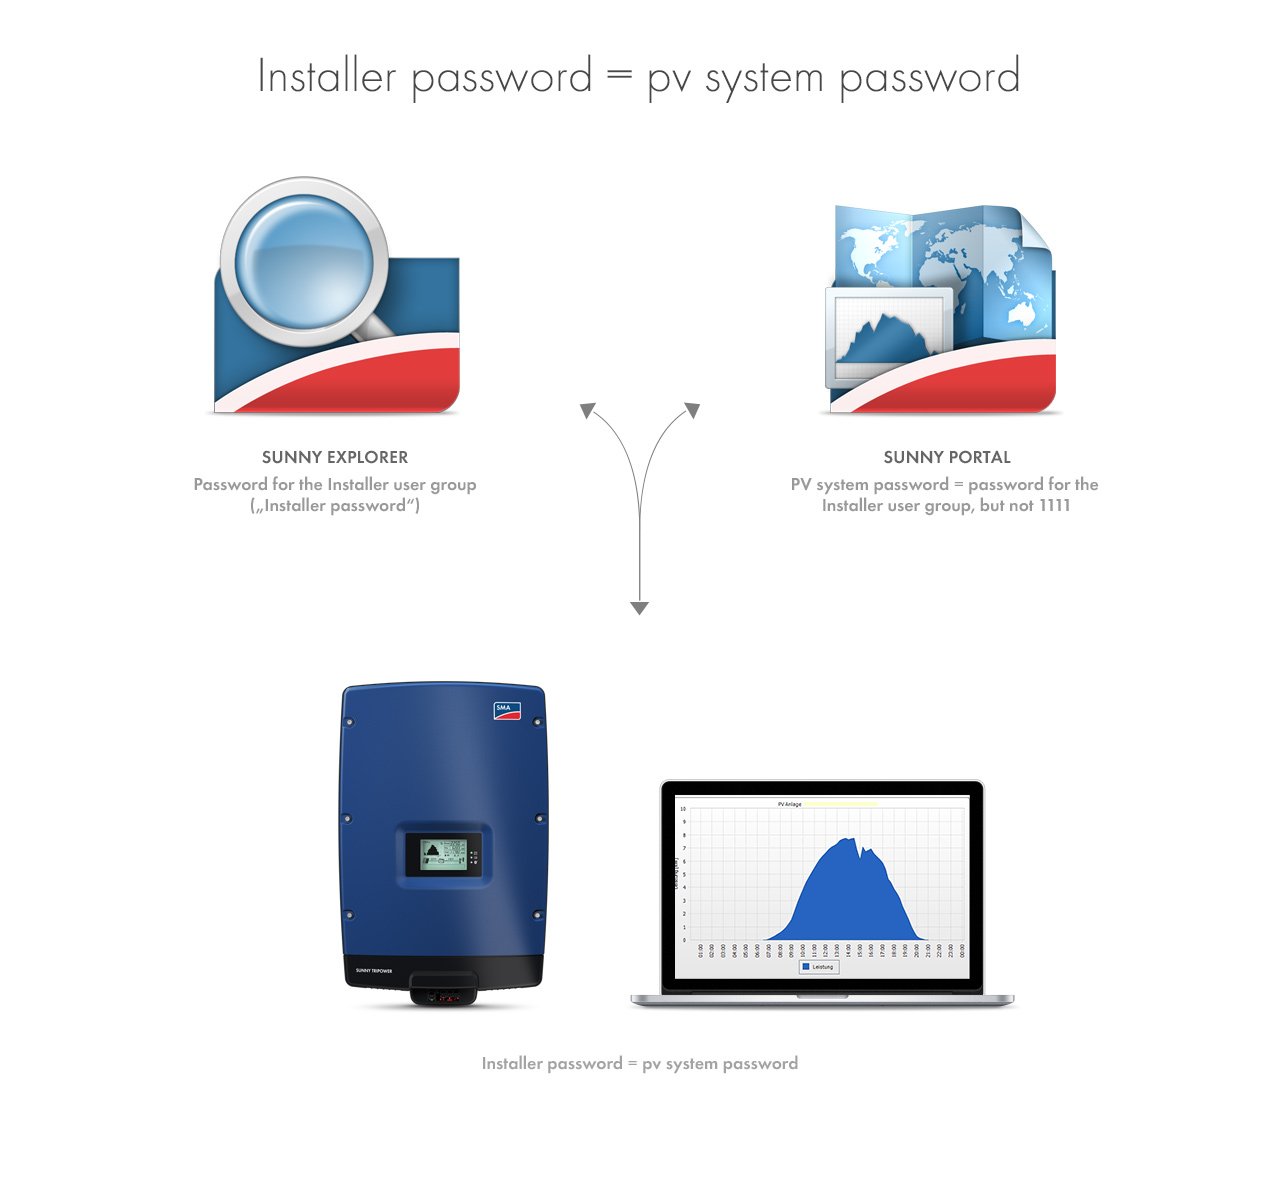 Please do remember that the password for the "Installer" user group and the system password is one and the same password. In this way, you can access all devices in the plant through both, Sunny Explorer and Sunny Portal. All data are displayed. 